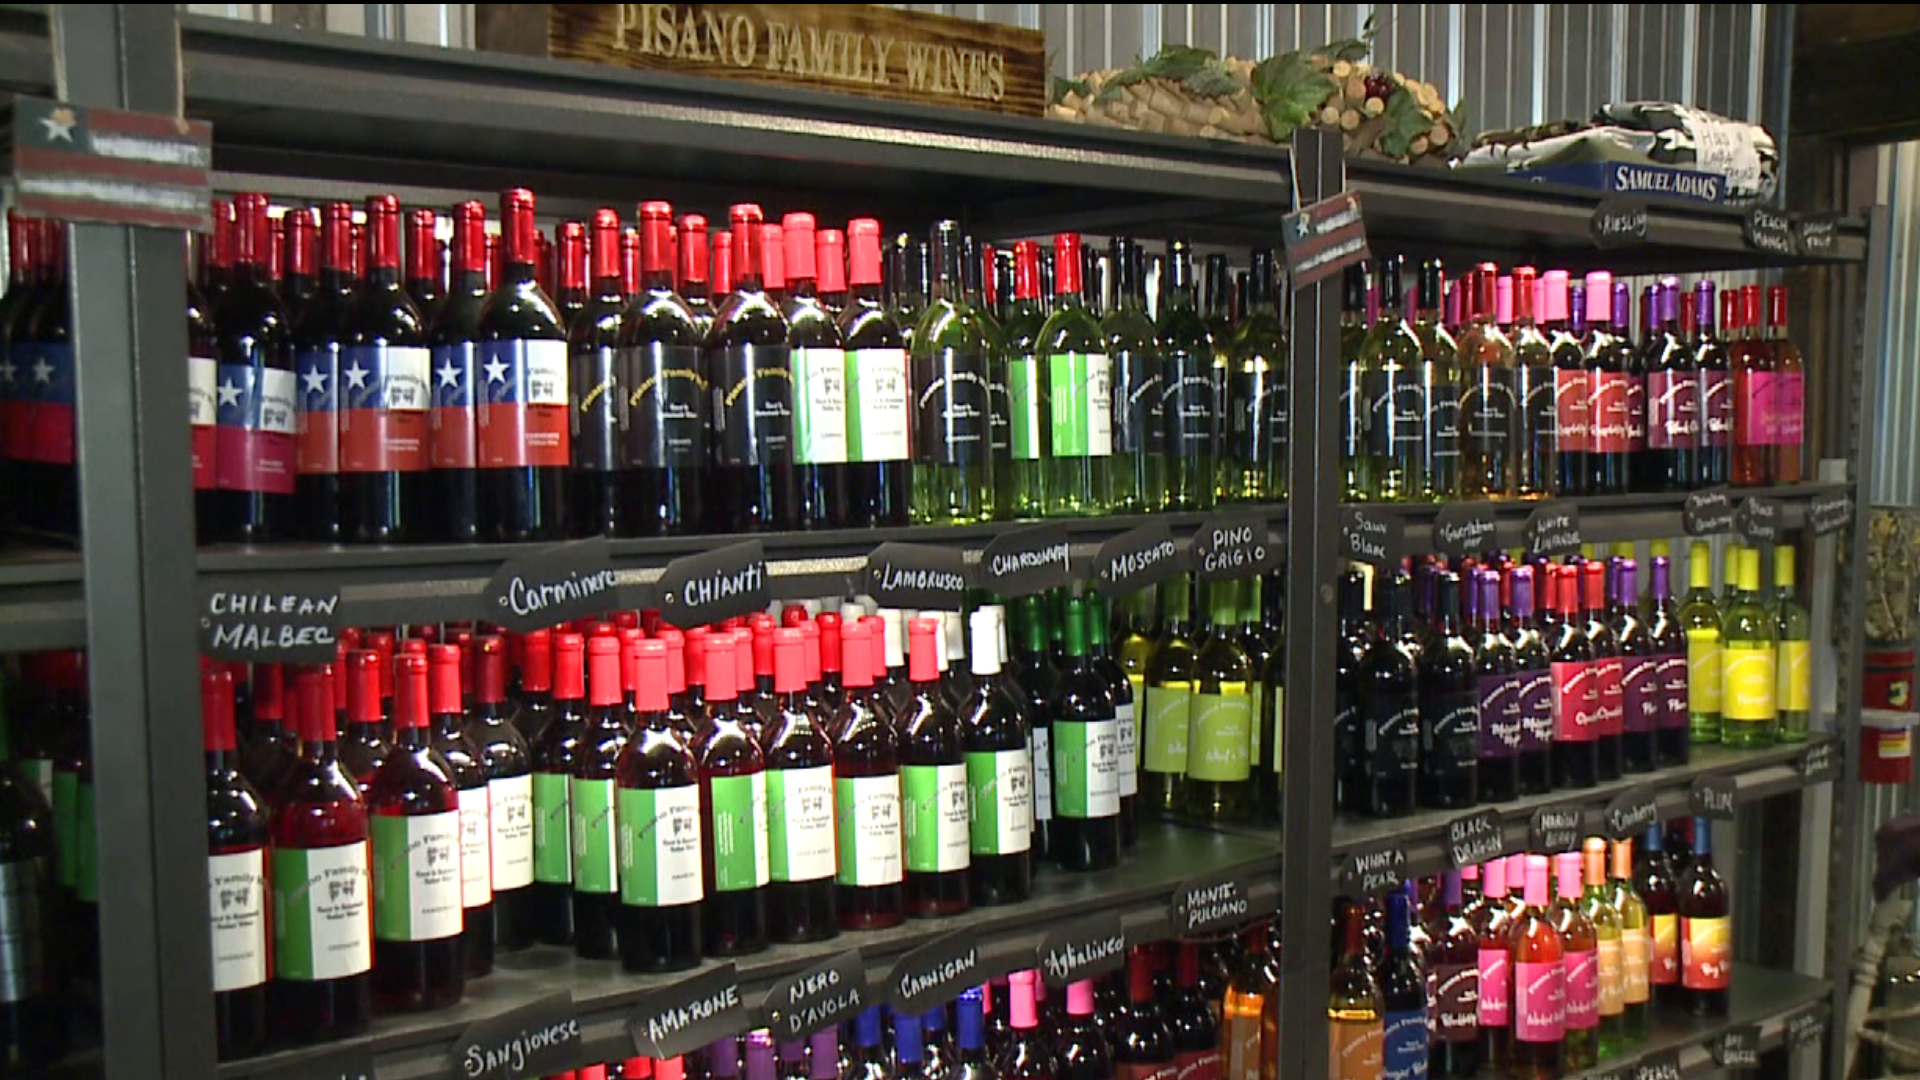 Pisano Family Wines in Lehman Township is open now, but it was told to shut down for a zoning violation that the owner says is unclear.